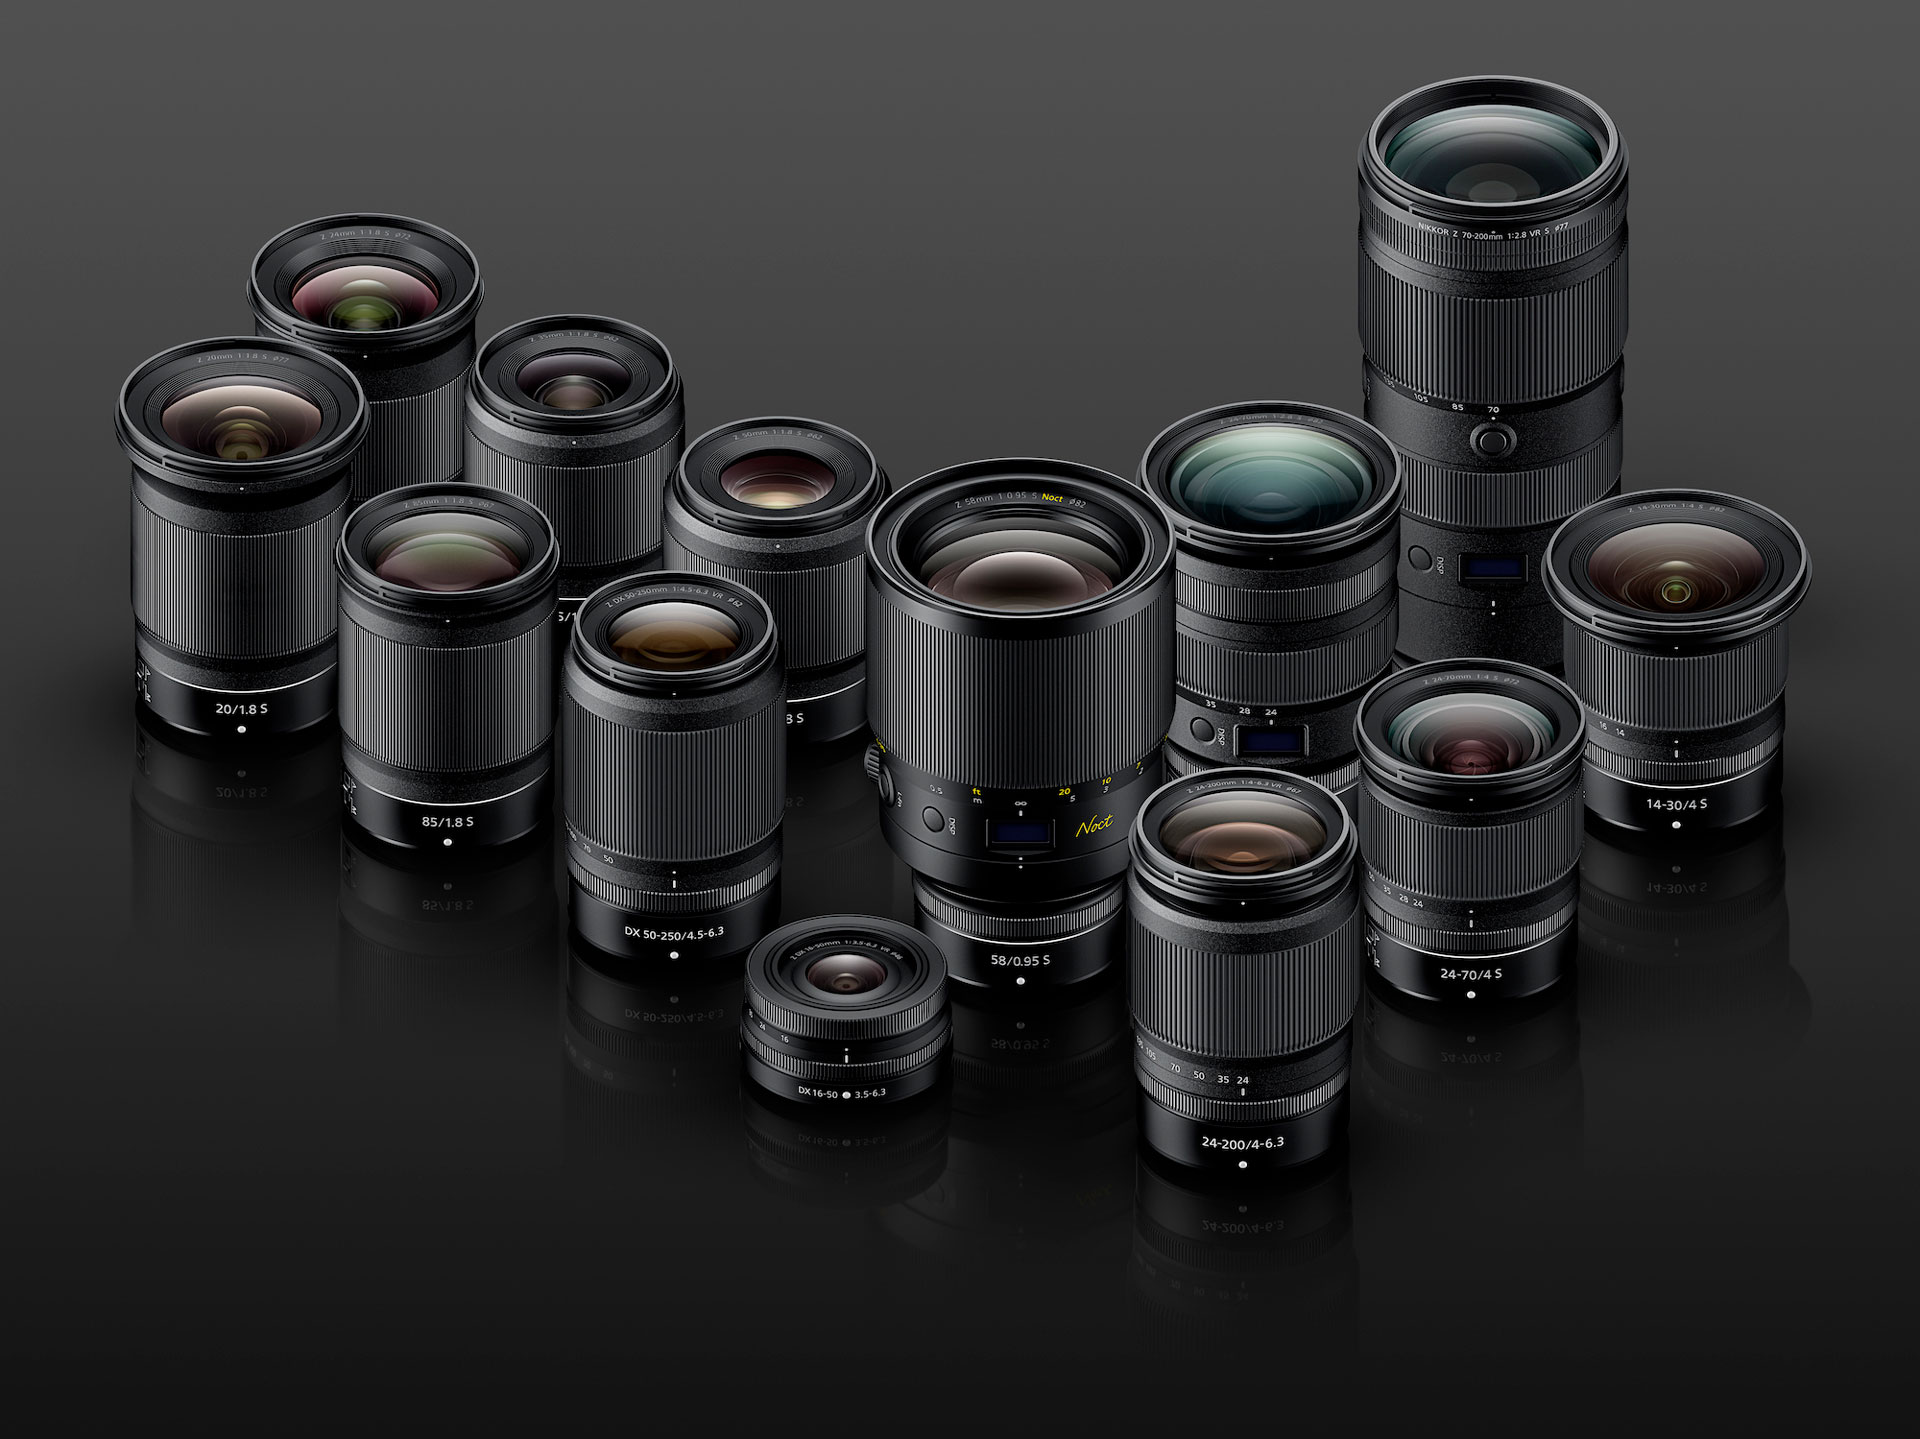 pindas Defilé Mondstuk Nikon releases the fast, ultra-wide-angle prime NIKKOR Z 20mm f/1.8 S, and  the high-power zoom NIKKOR Z 24-200mm f/4-6.3 VR | News | Nikon About Us